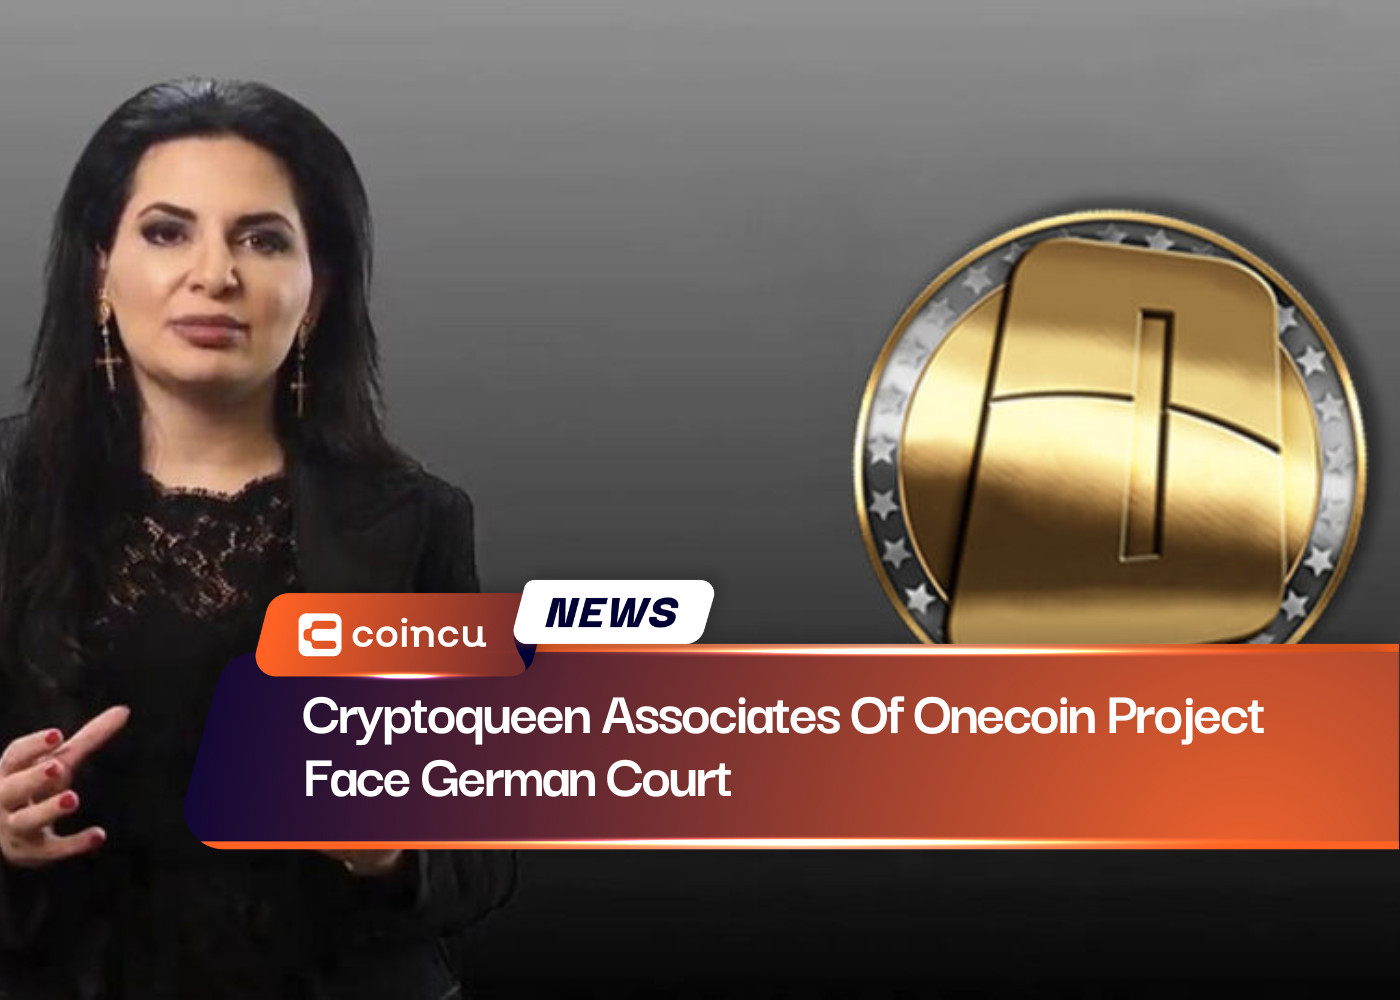 Cryptoqueen Associates Of Onecoin Project Face German Court